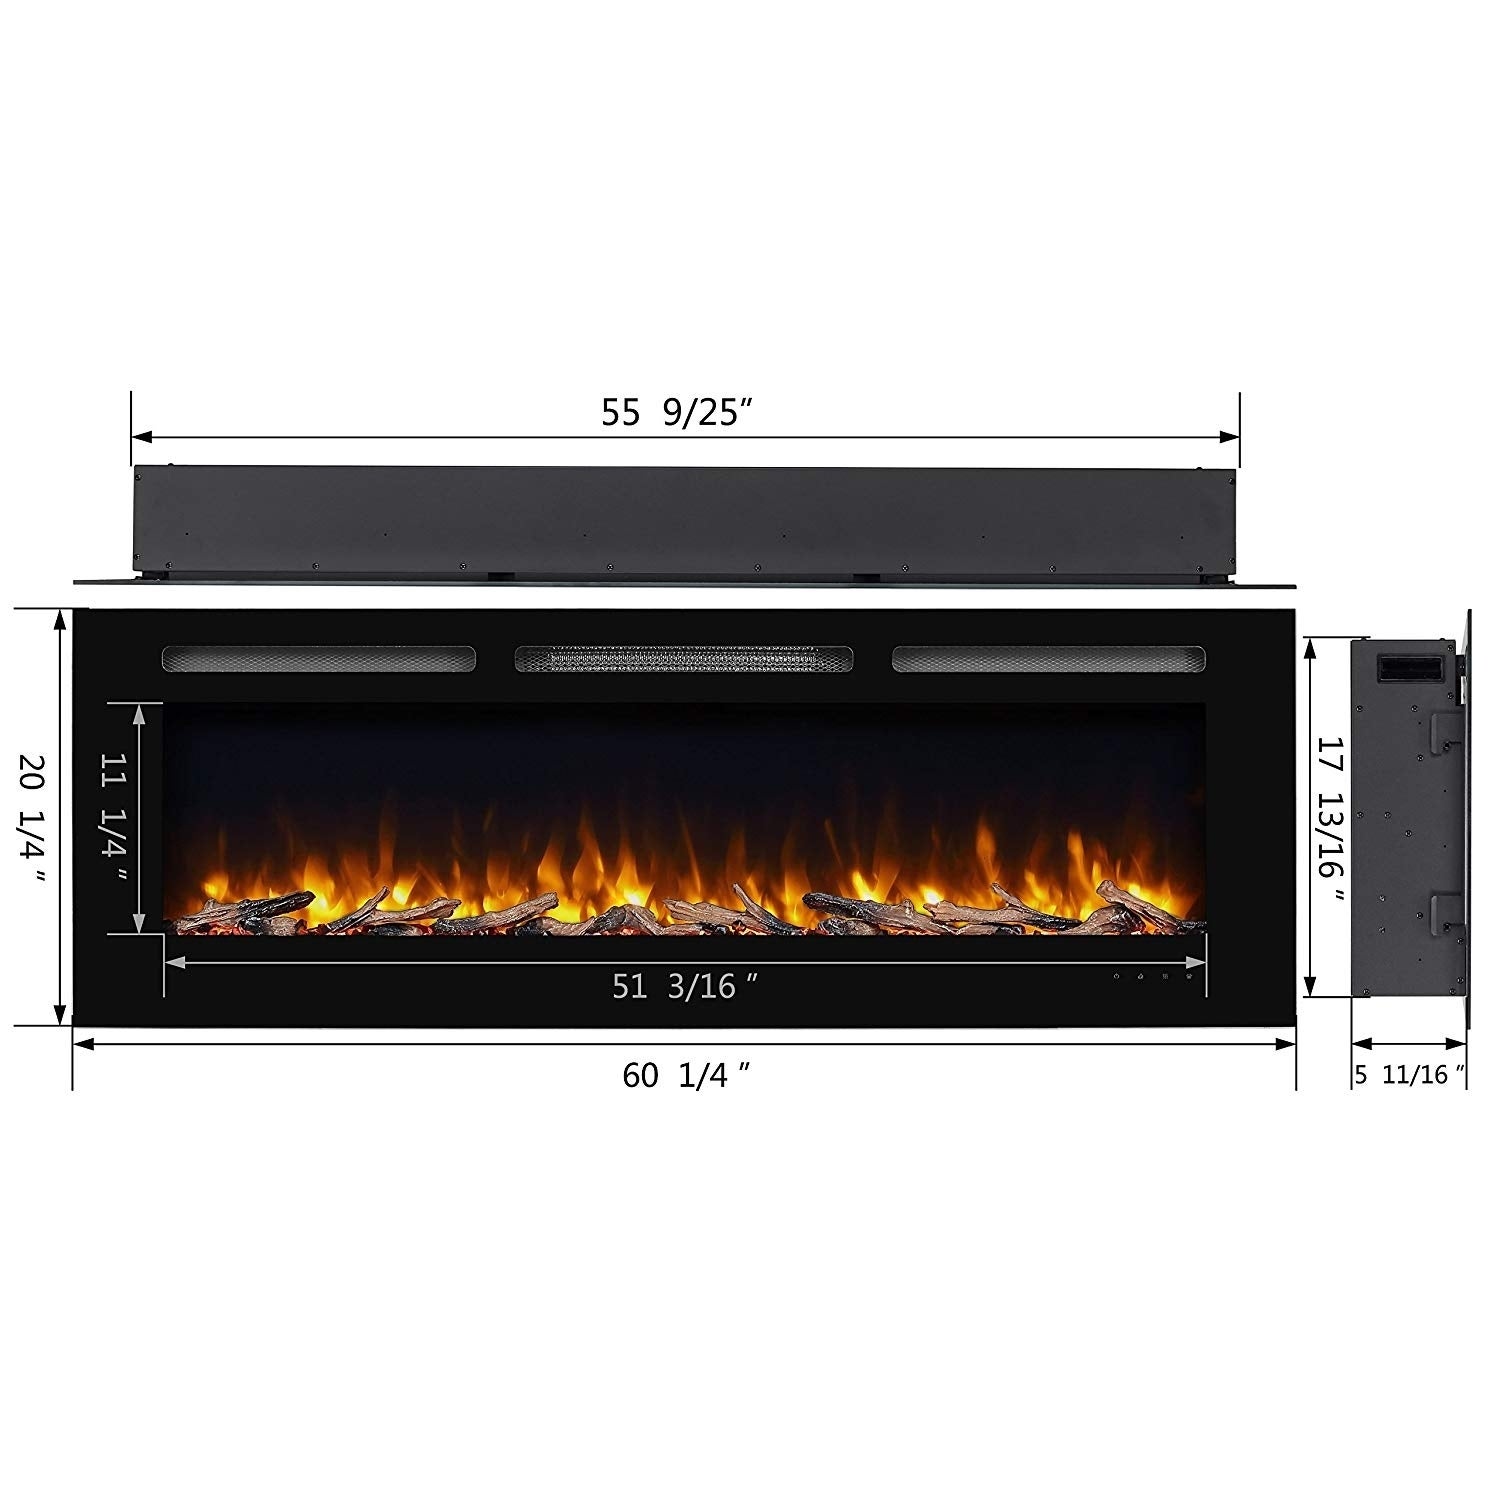 60 Alice In Wall Recessed Electric Fireplace 1500W Black 667c3b68 34f7 431a 8309 db7c615cc93a